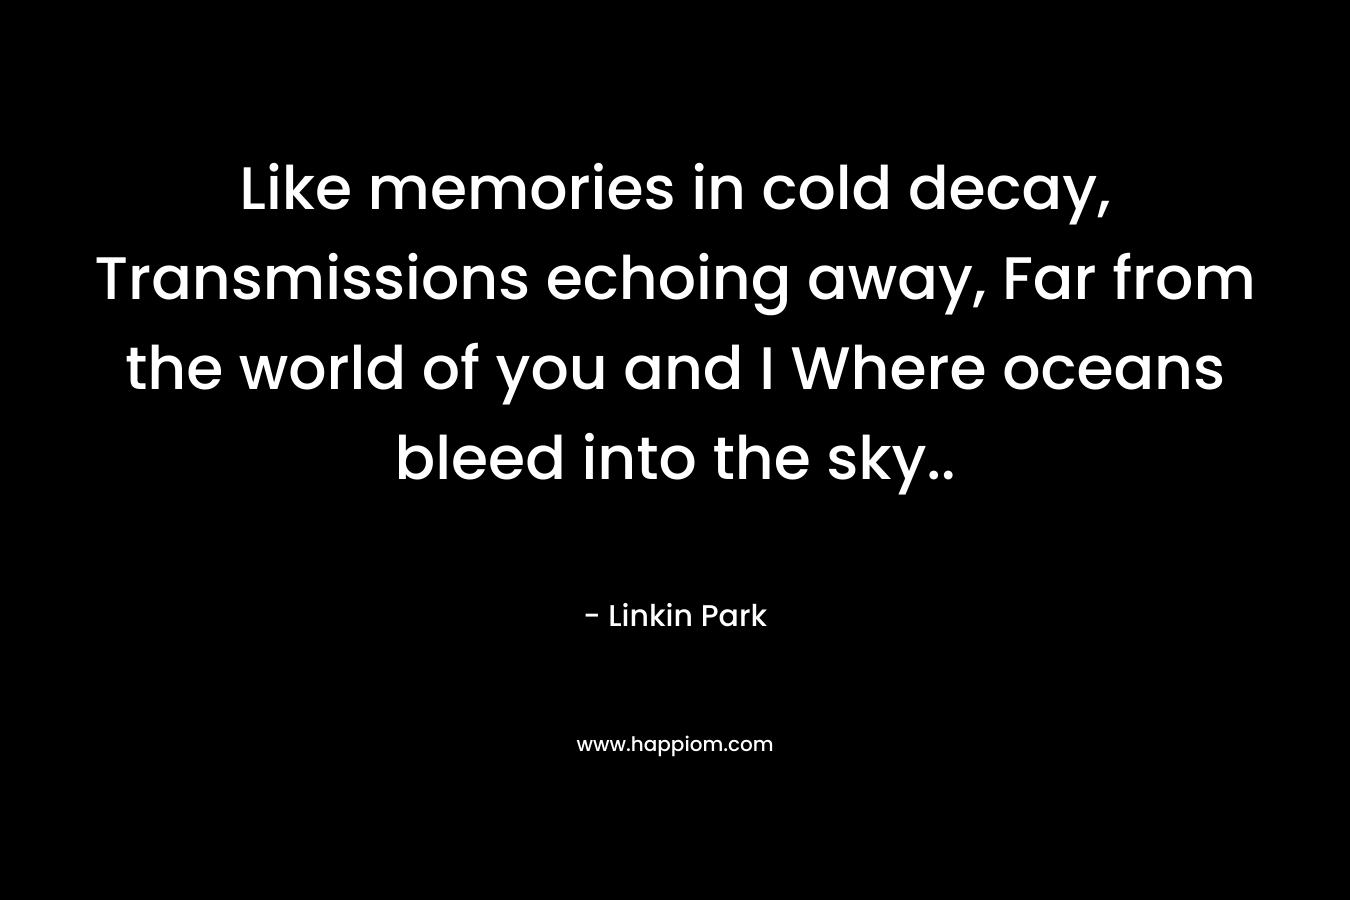 Like memories in cold decay, Transmissions echoing away, Far from the world of you and I Where oceans bleed into the sky..